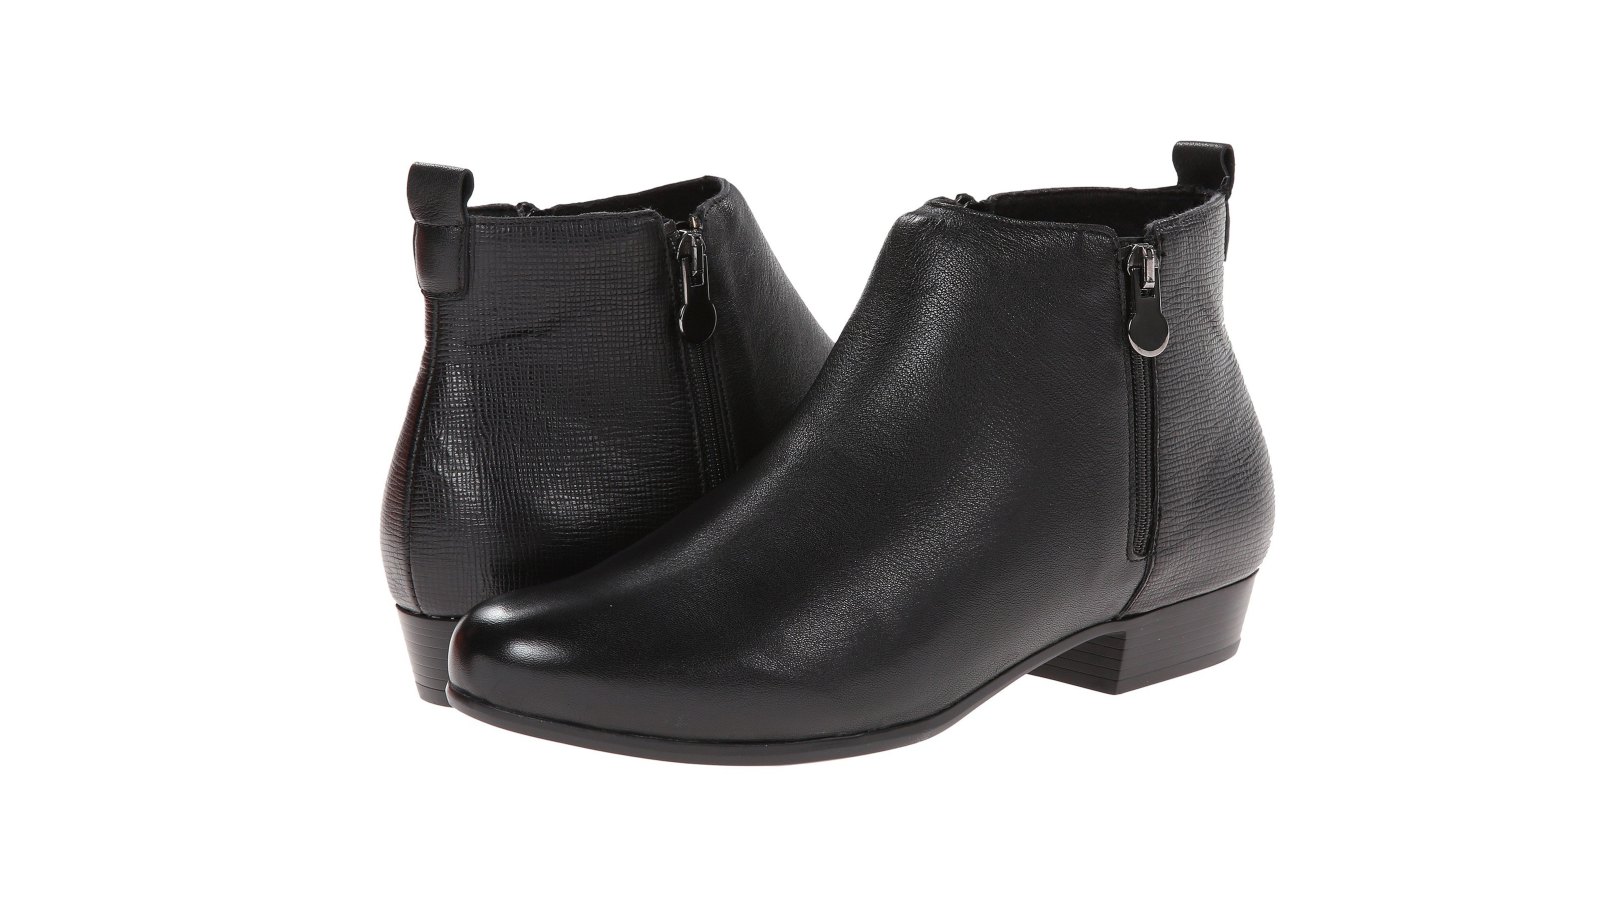 Munro Lexi ankle booties